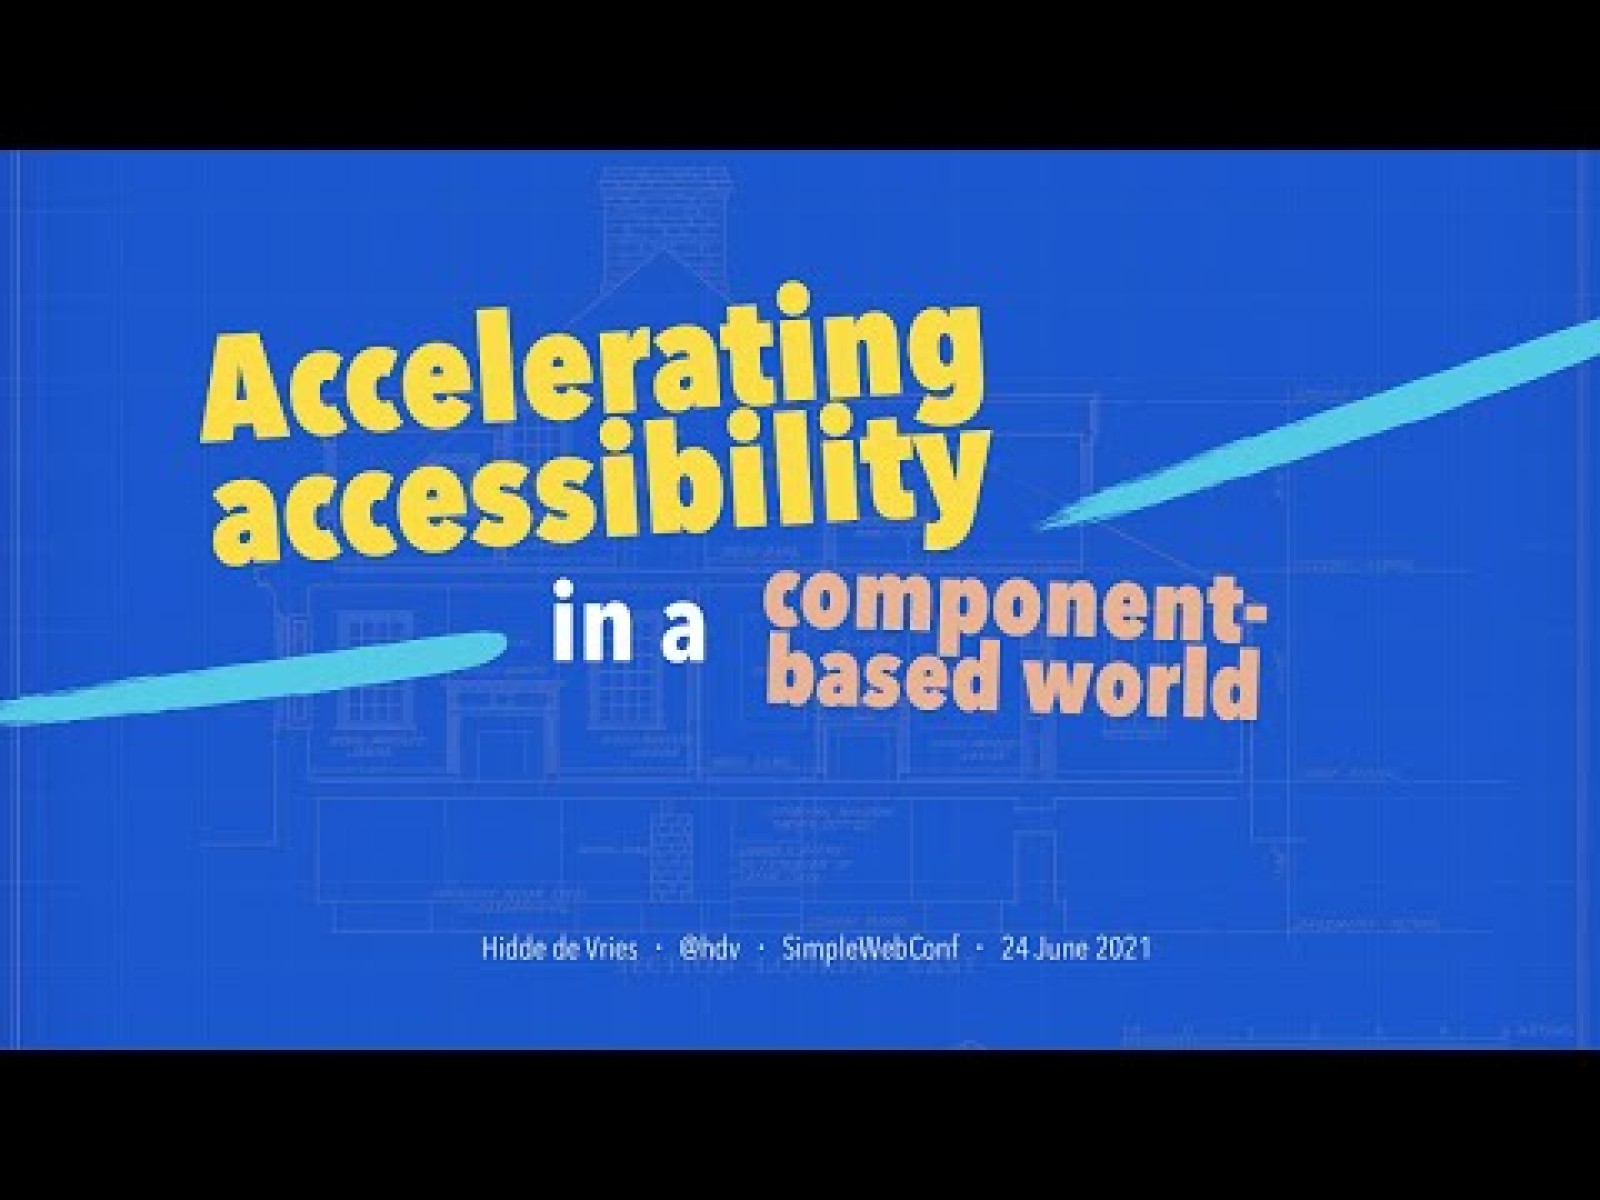 Accelerating accessibility in a component-based world